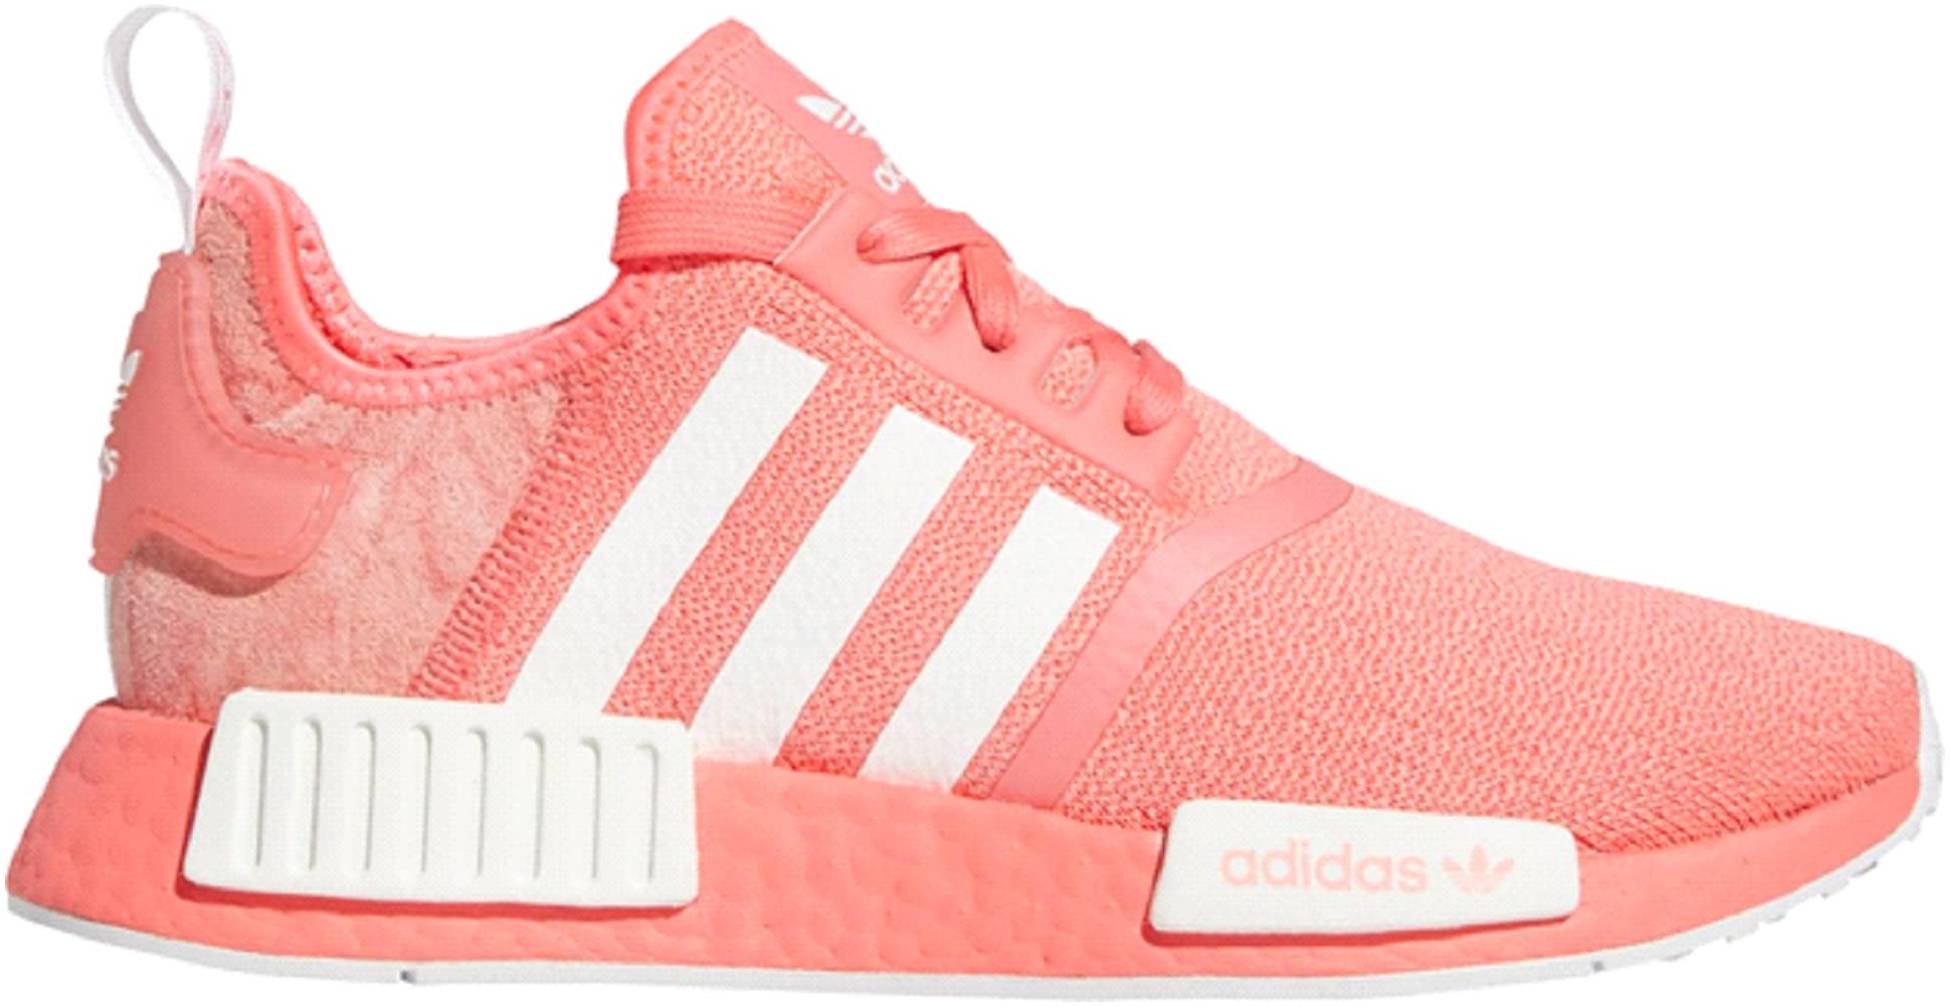 Inactivo Atticus sacerdote 20+ Pink Adidas sneakers: Save up to 51% | RunRepeat